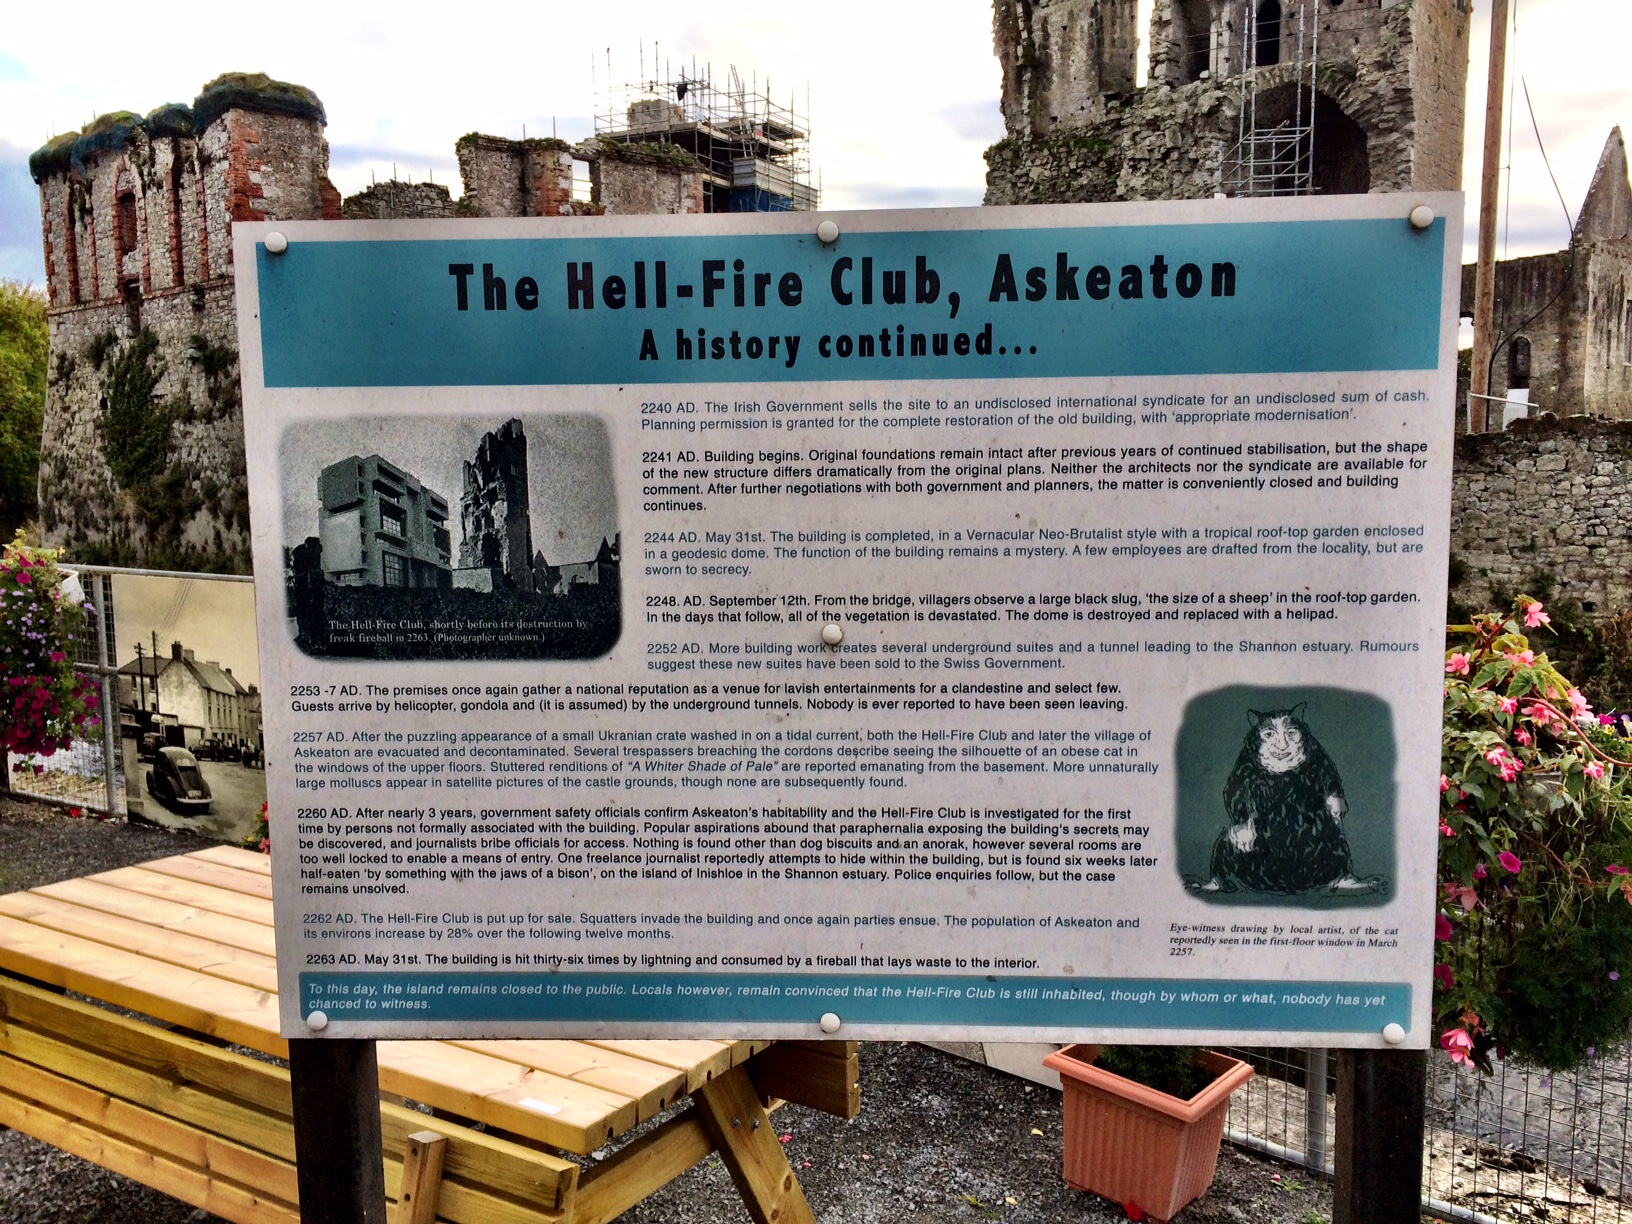 Askeaton, The Hell-Fire Club and Late Night Shenanigans